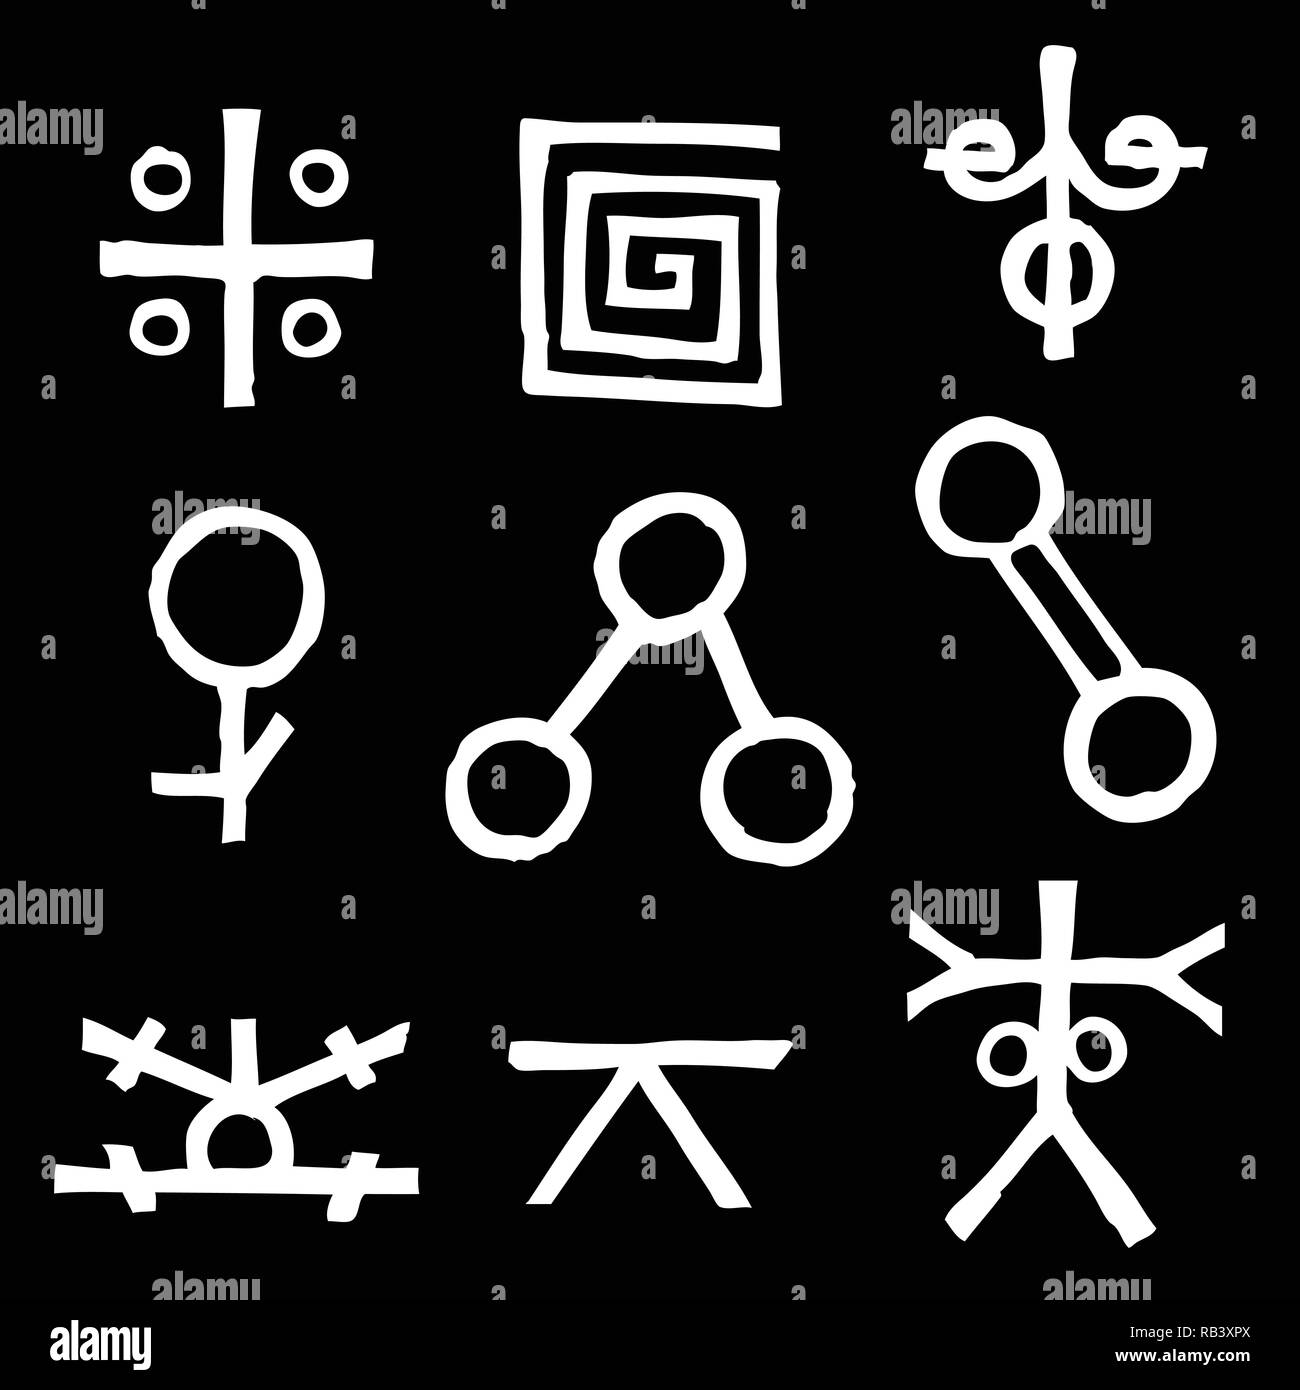 Wiccan symbols imaginary cross symbols, inspired by antichrist pentagram and witchcraft. Vector. Stock Vector